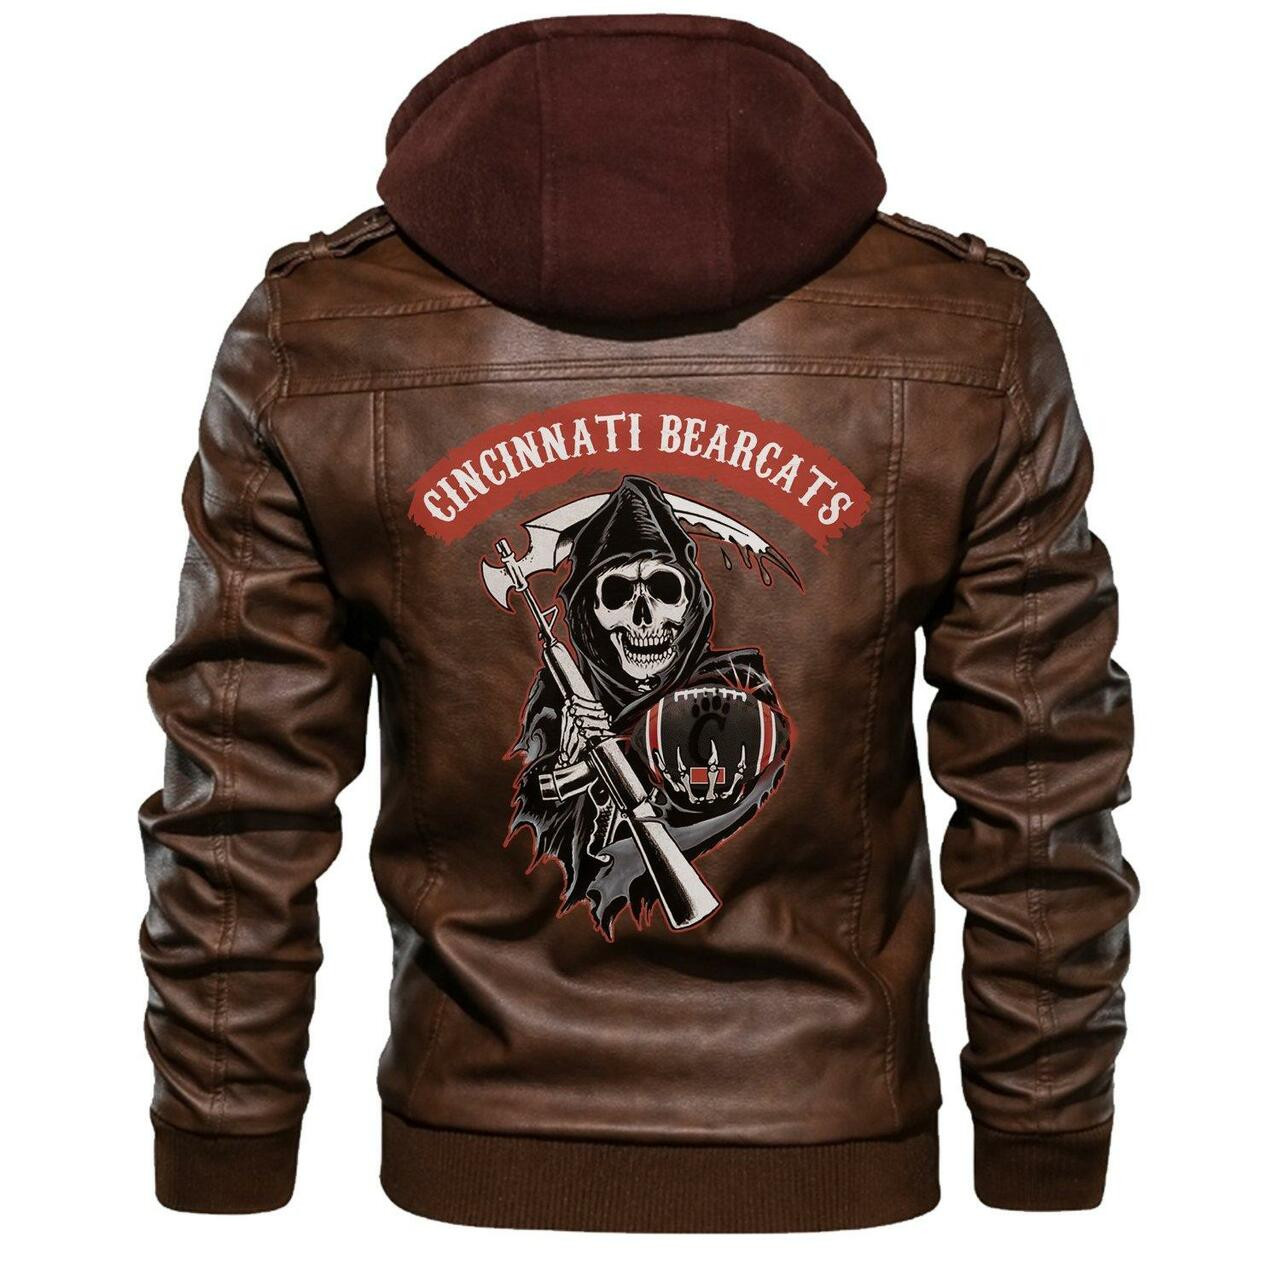 You can find Leather Jacket online at a great price 5